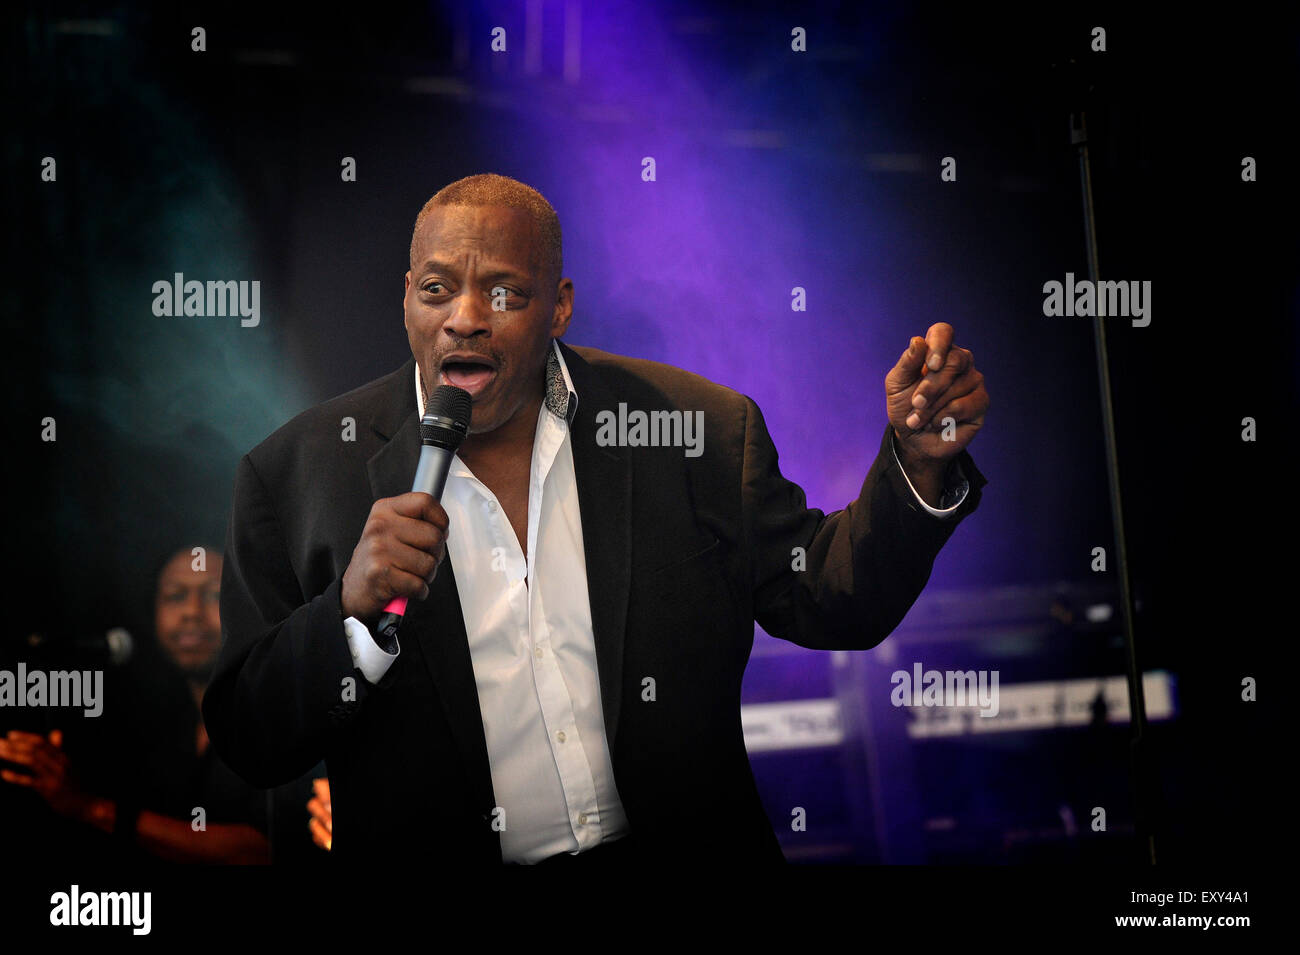 Brentwood, Essex.  17th July, 2015.  The 80’s singer Alexander O’Neal entertains a sell-out crowd at the Brentwood Festival.   Credit:  Gordon Scammell. Alamy Live News. Stock Photo